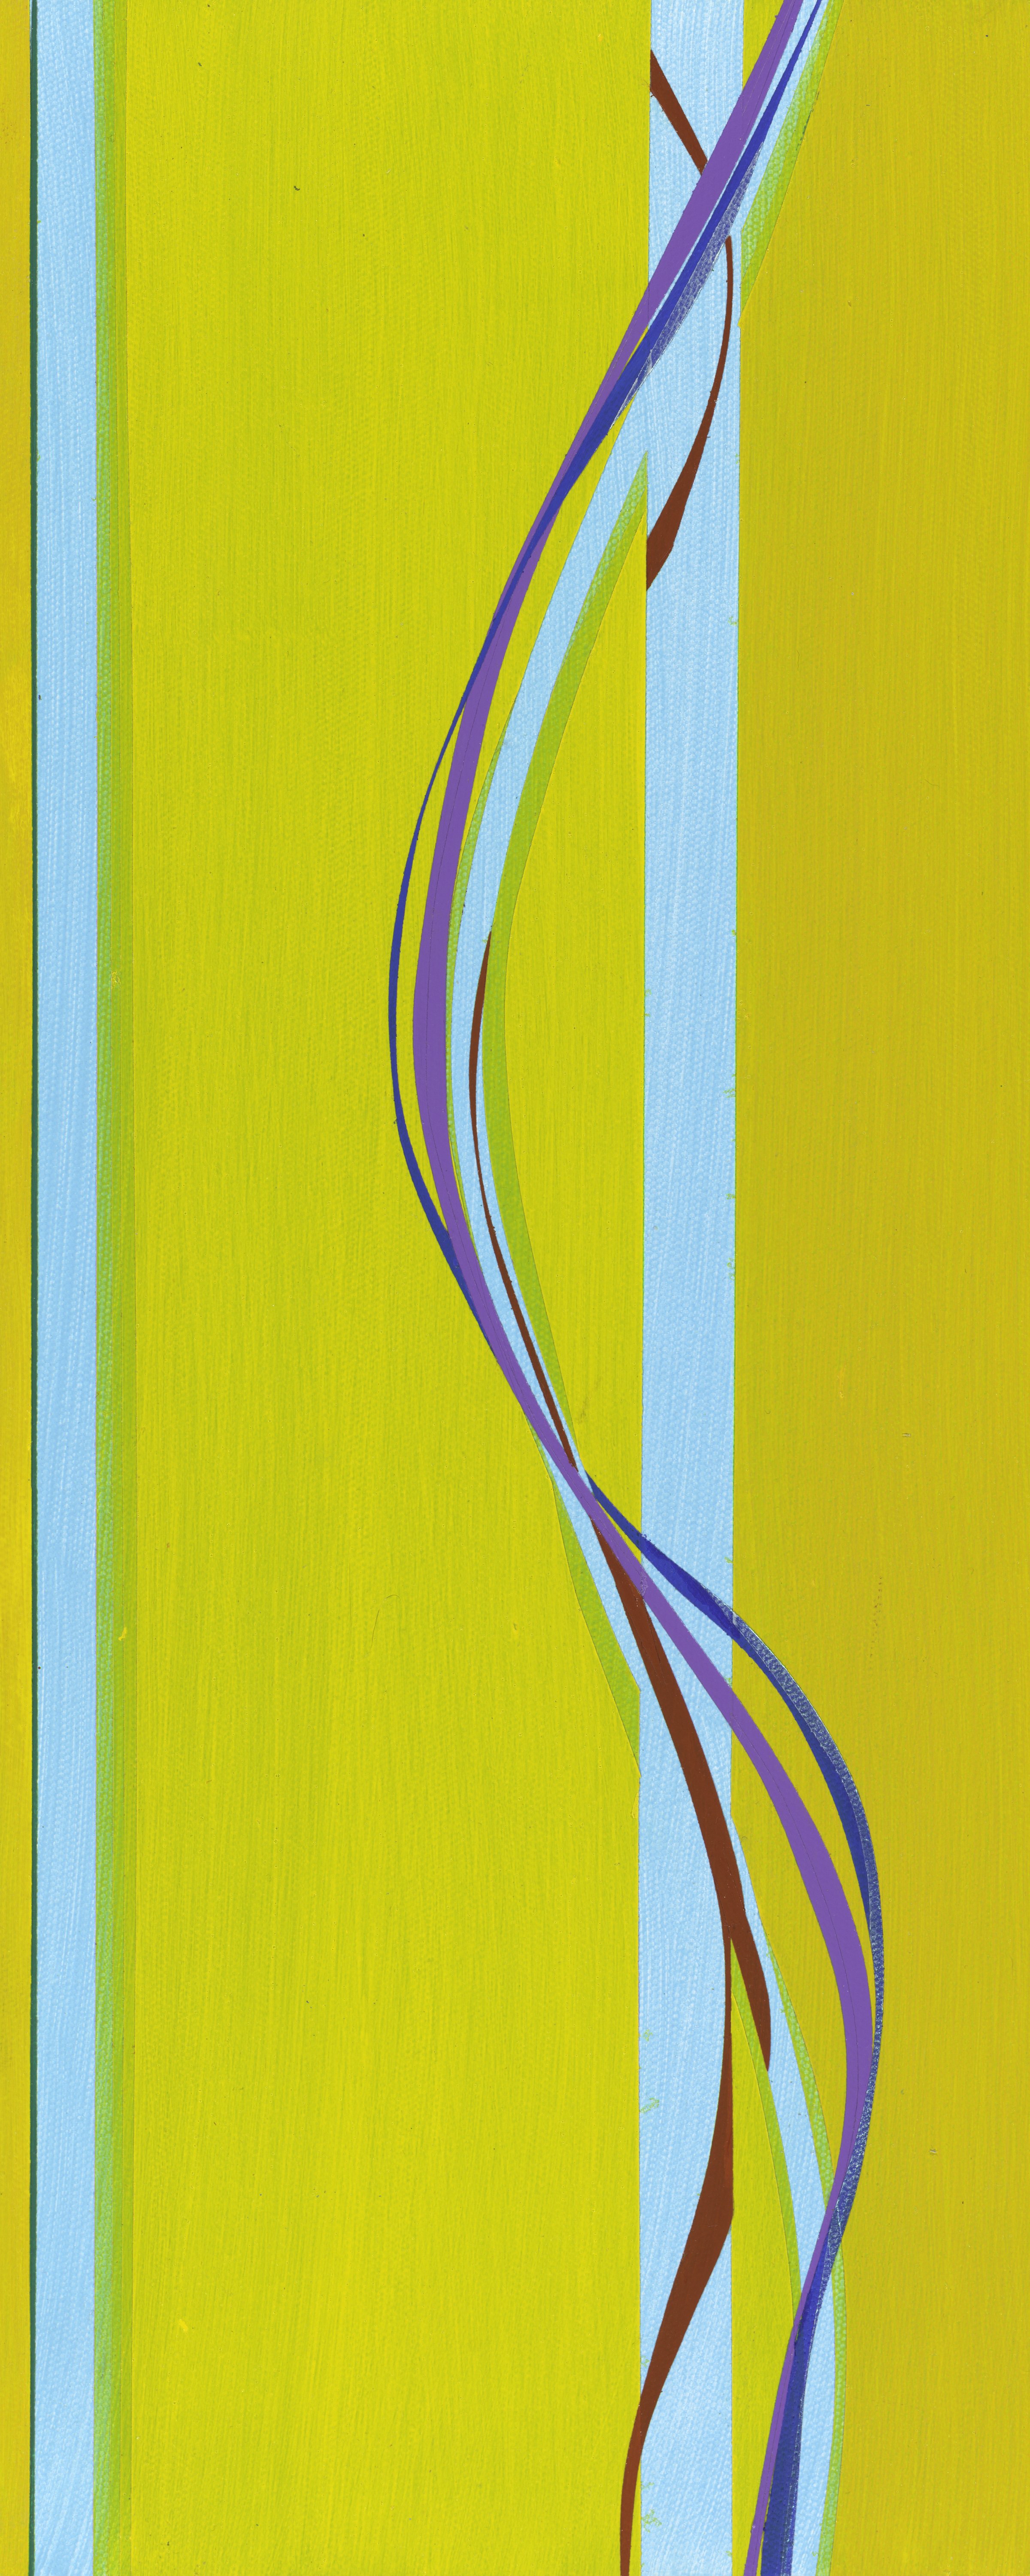 Alicia_Philley_Ribbons of Light_scan_Agave Print.jpg